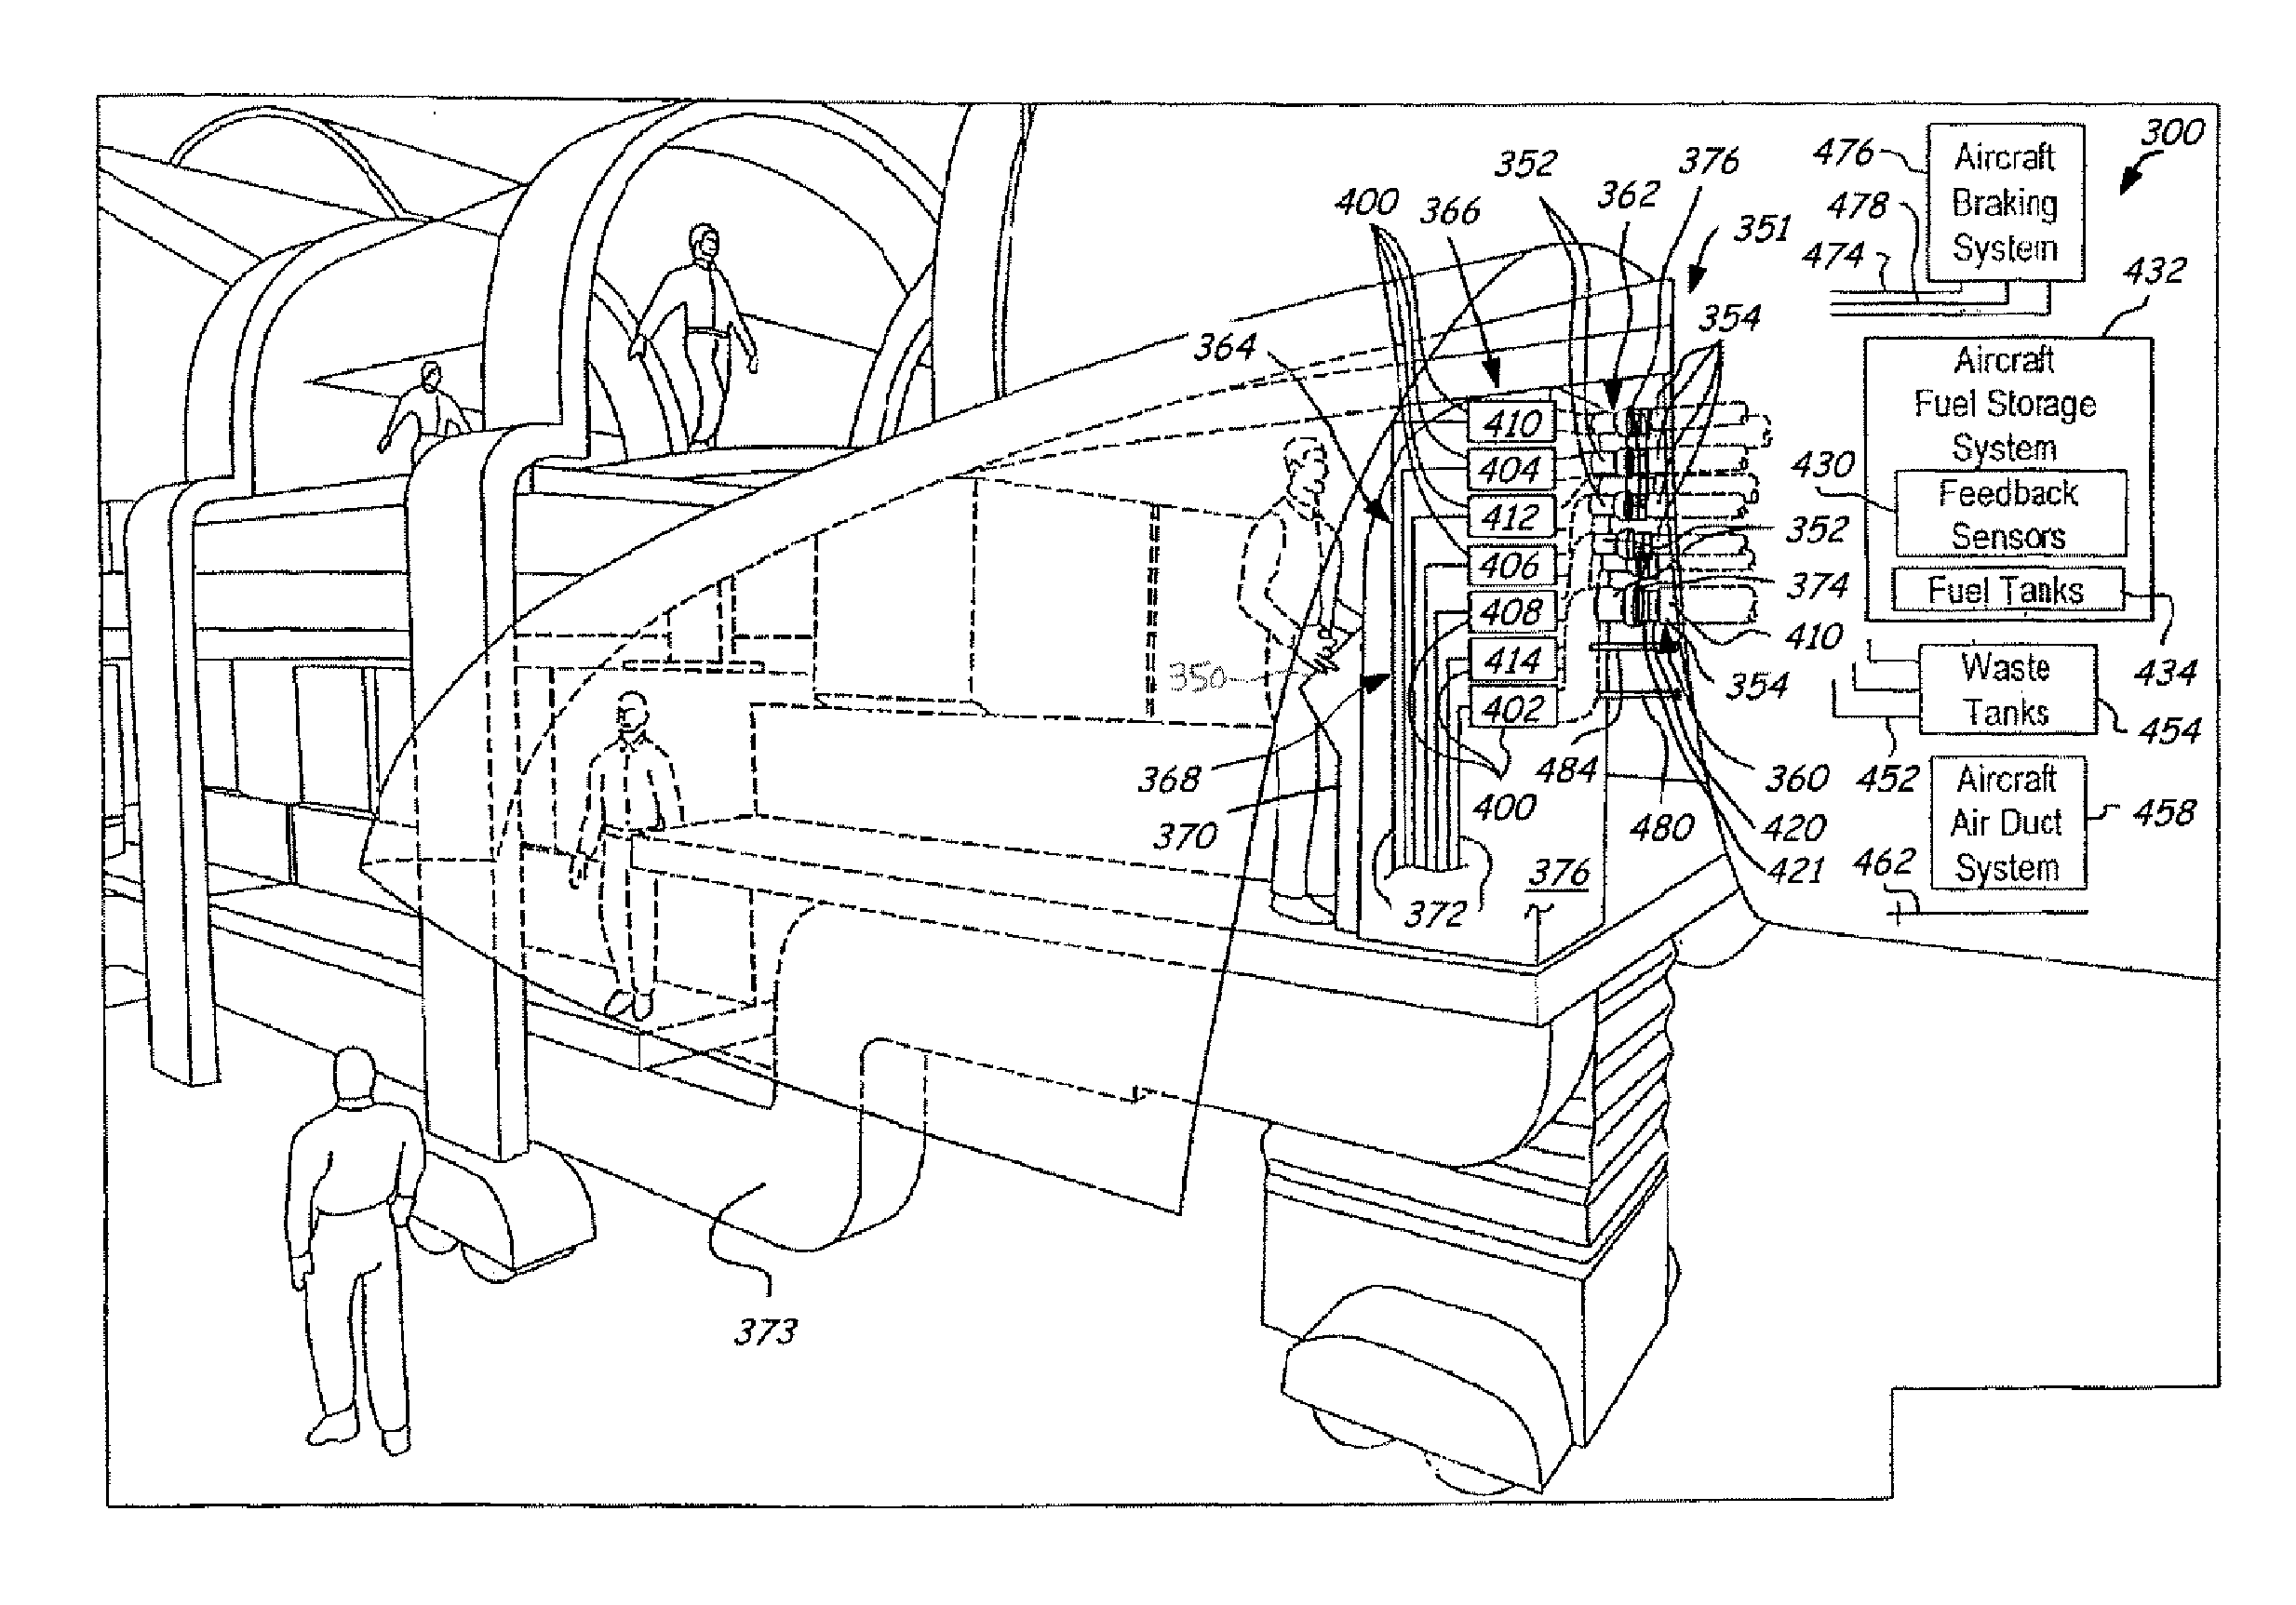 Operational ground support system having automated primary servicing